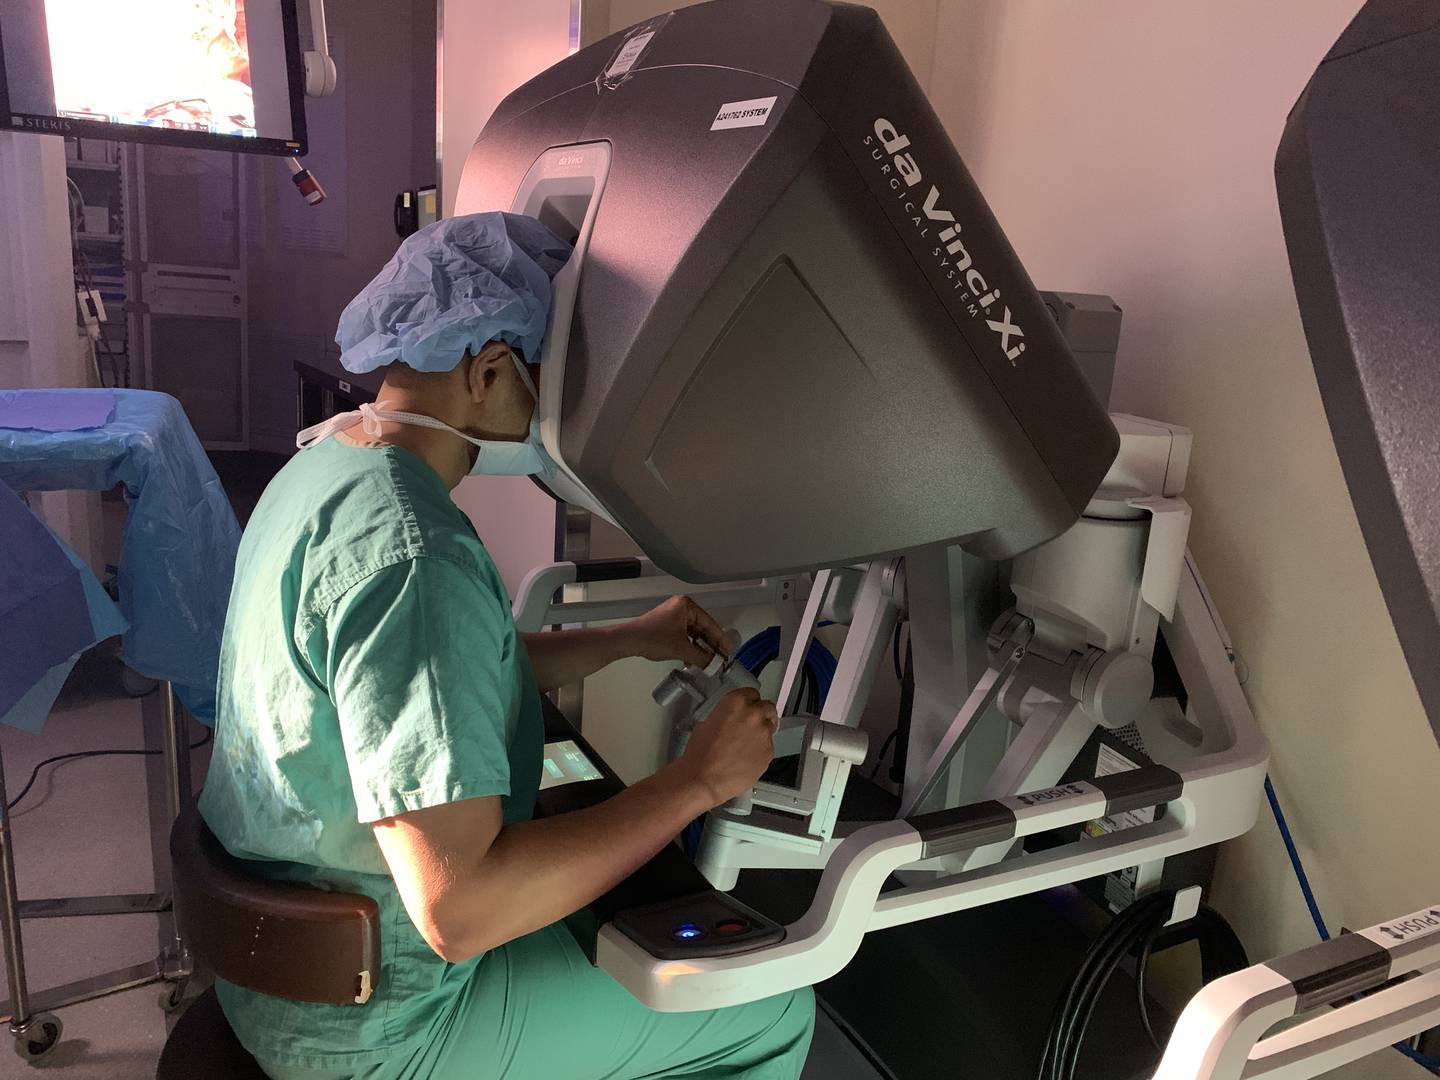 Dr. Ankit Bharat, chief of thoracic surgery at Northwestern Medicine, uses robotic assistance to perform minimally invasive lung cancer surgery at Northwestern Memorial Hospital in Chicago.